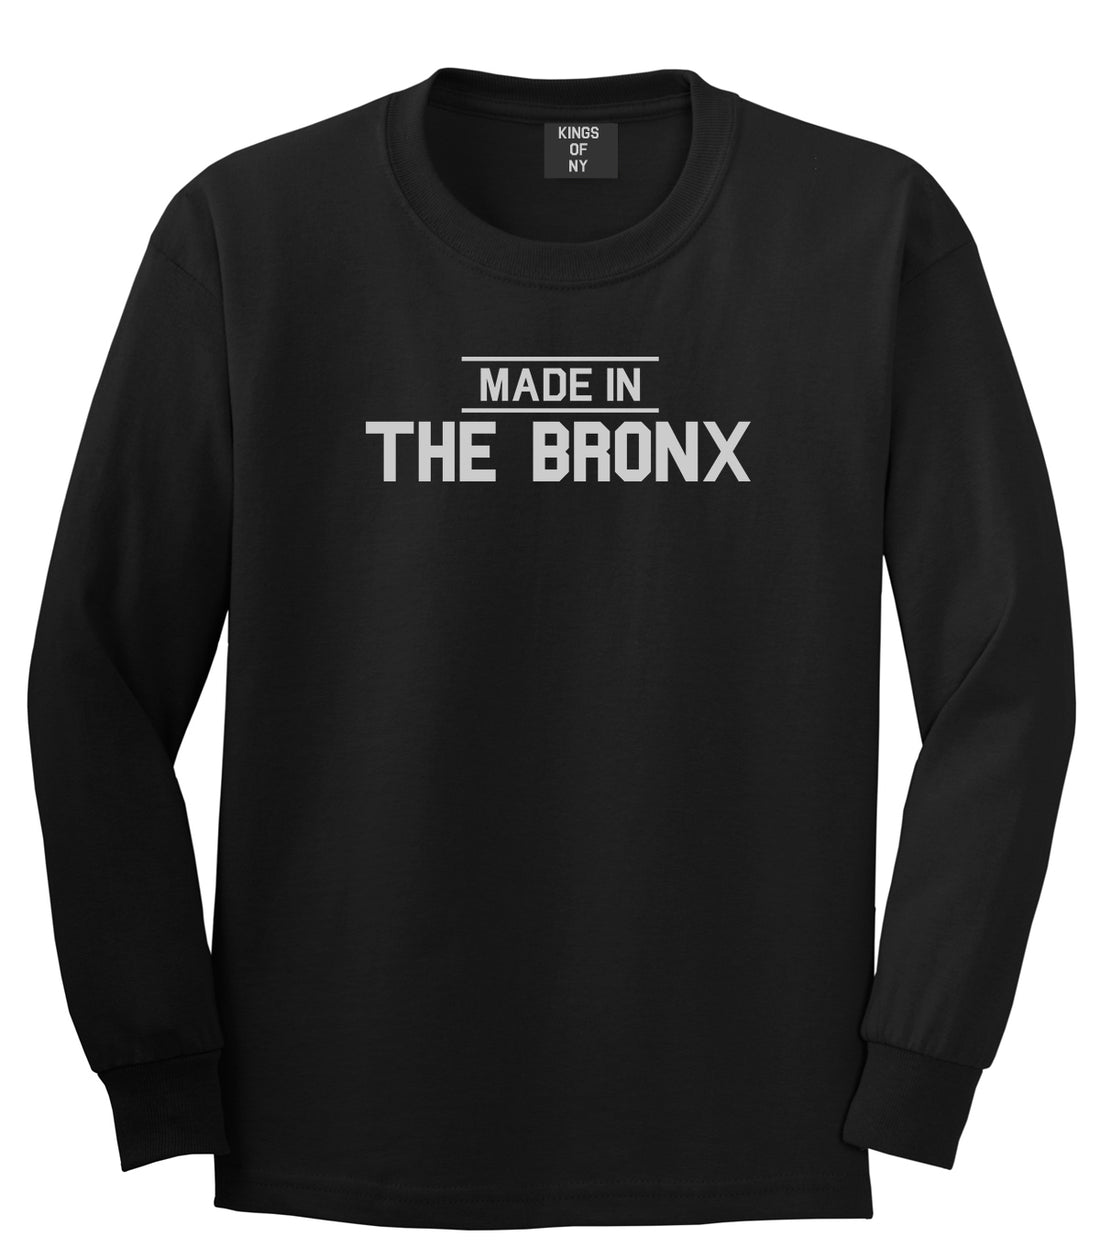 Made In The Bronx Mens Long Sleeve T-Shirt Black by Kings Of NY